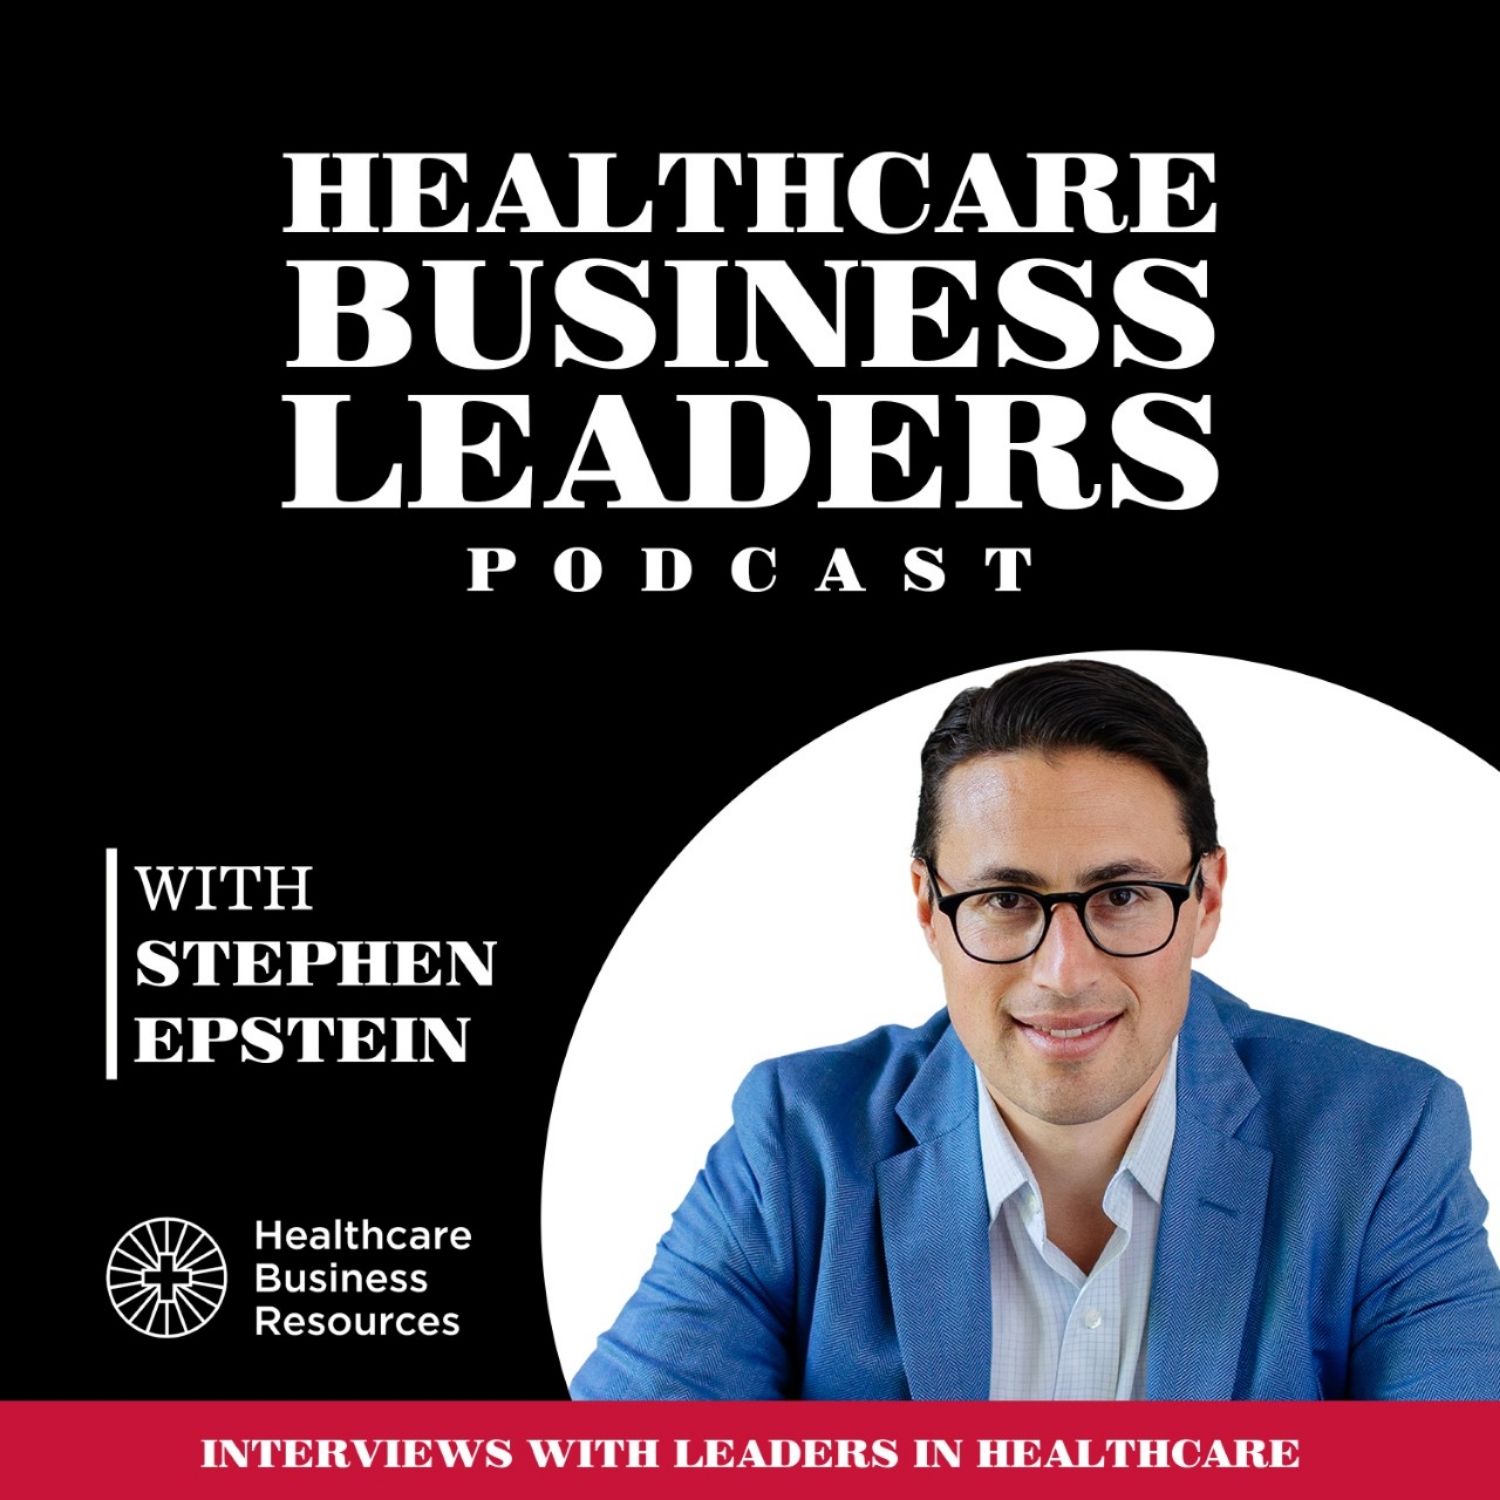 Healthcare Business Leaders Podcast with Stephen Epstein